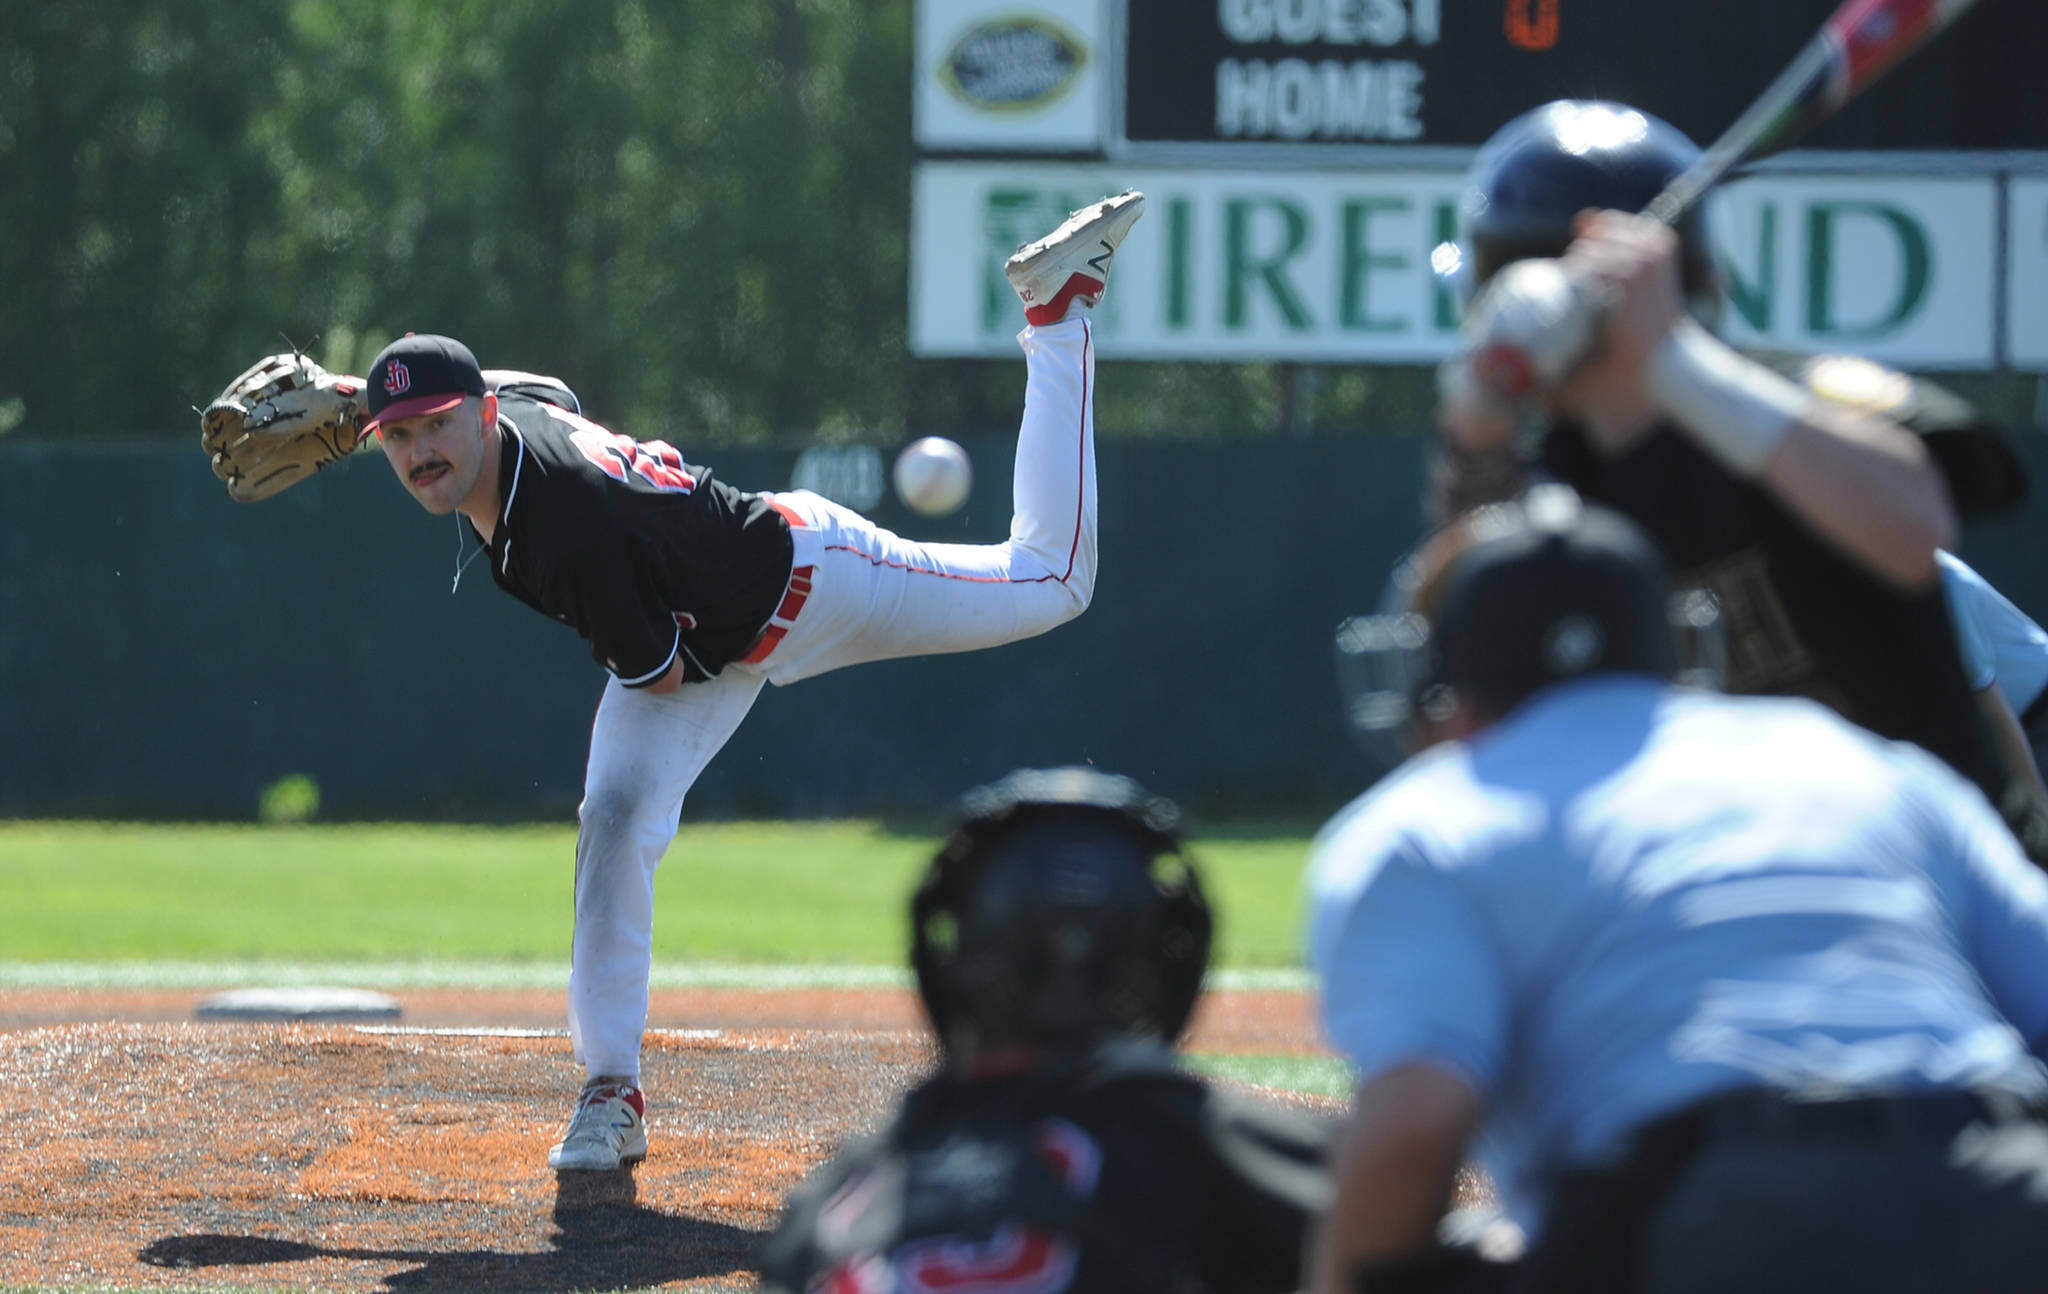 Juneau-Douglas High School pitcher Kasey Watts pitched six innings in the ASAA state baseball championship game. JDHS won 3-2 over South Anchorage. (Michael Dinneen | For the Juneau Empire)